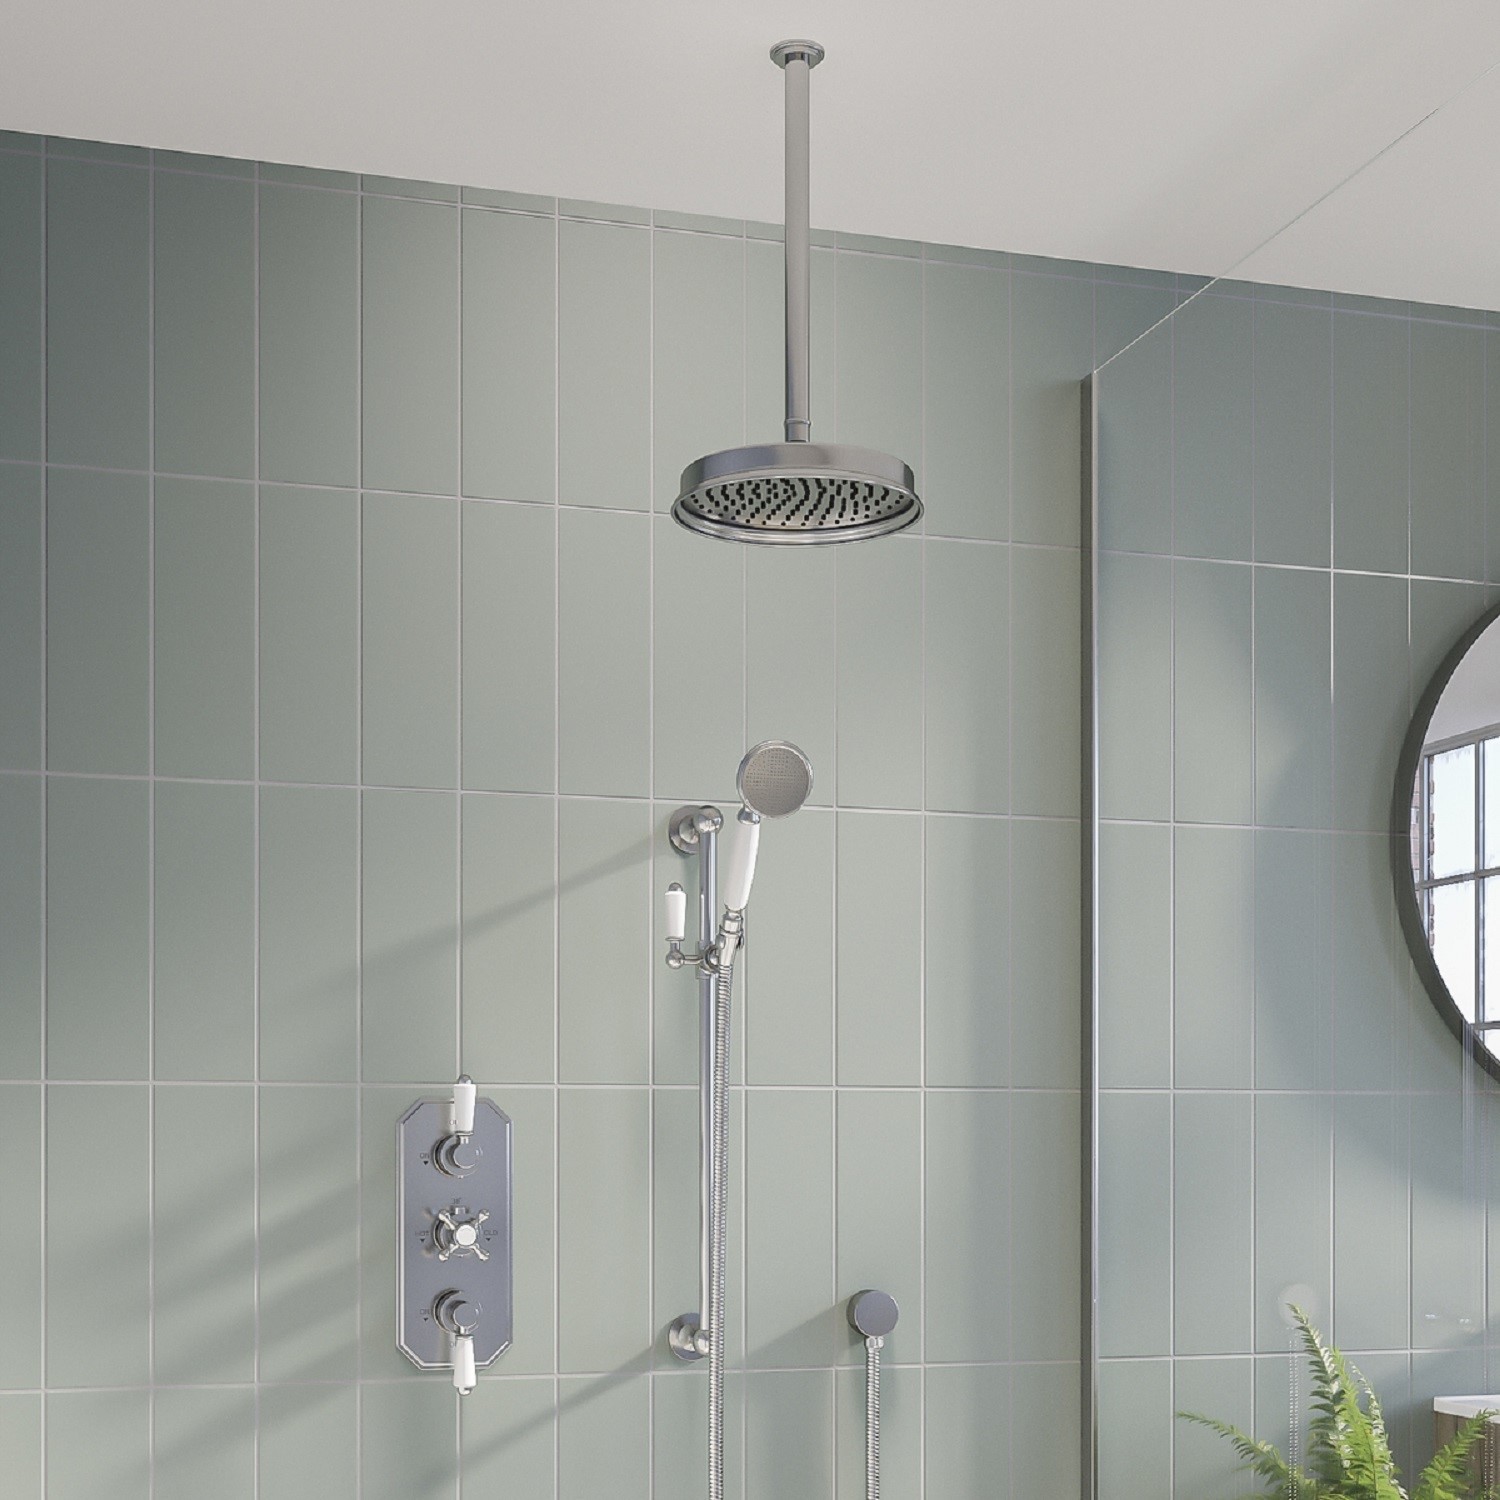 Cambridge traditional triple shower valve with diverter - 3 outlets